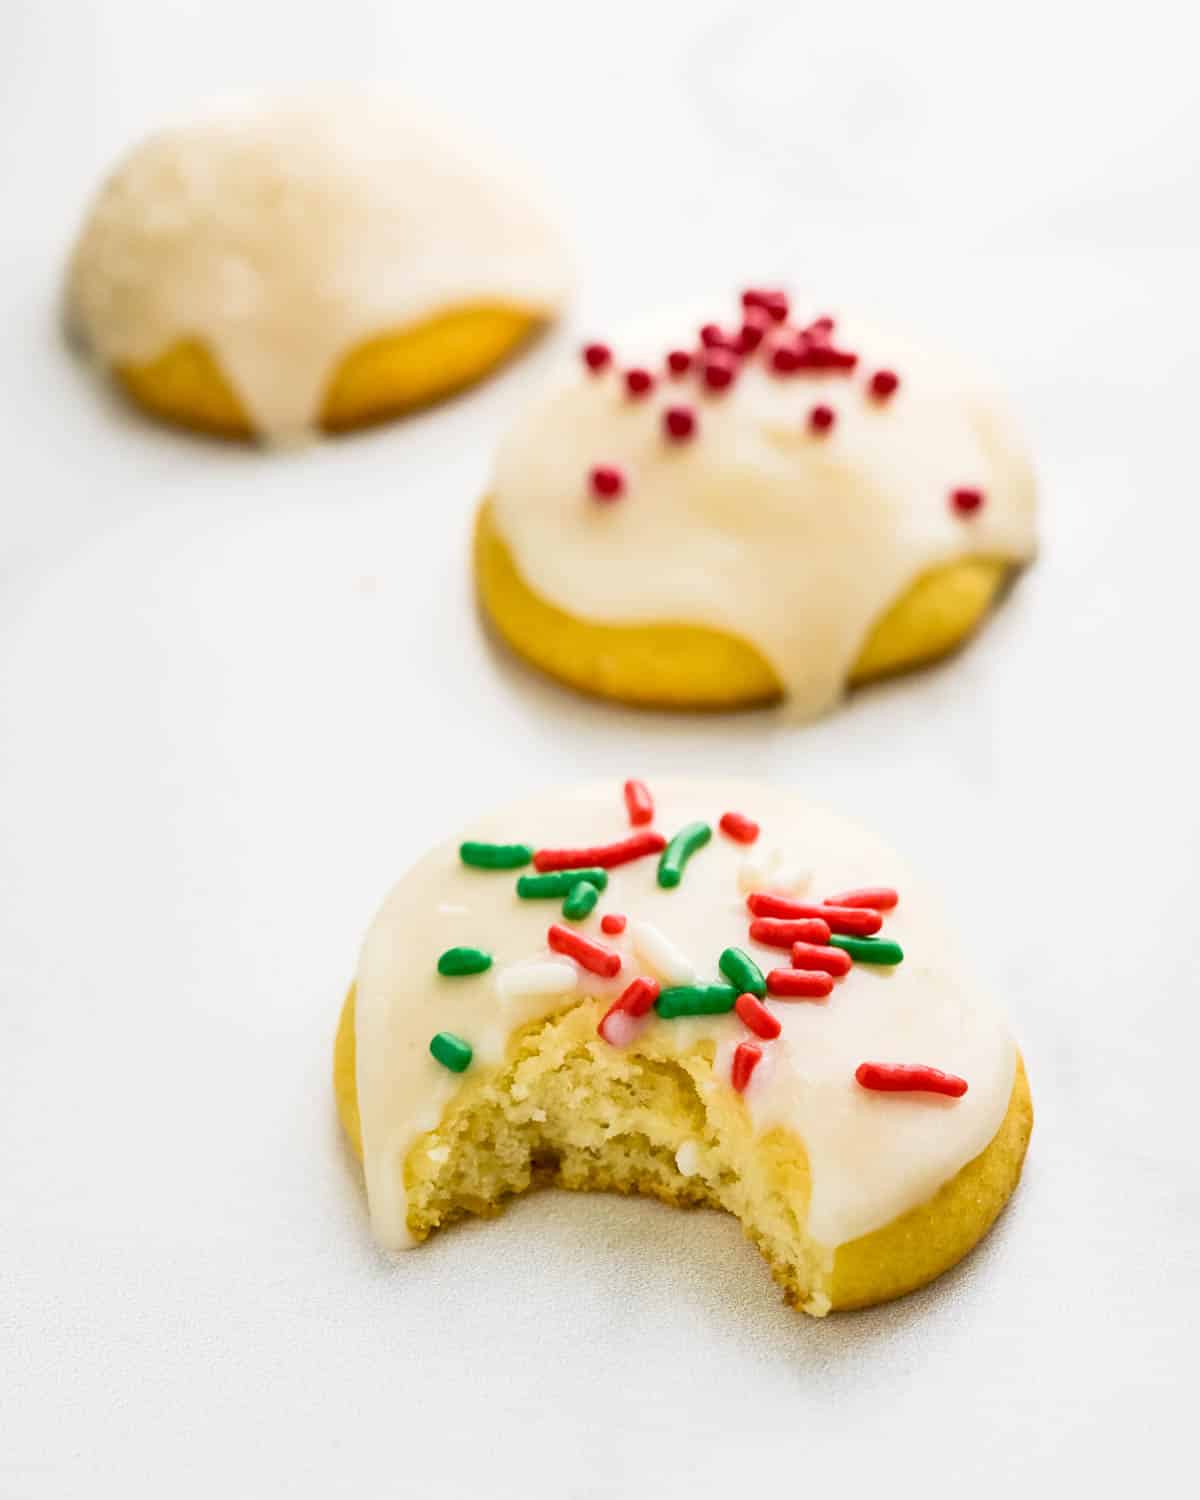 Taking a bite of the soft ricotta cookies.